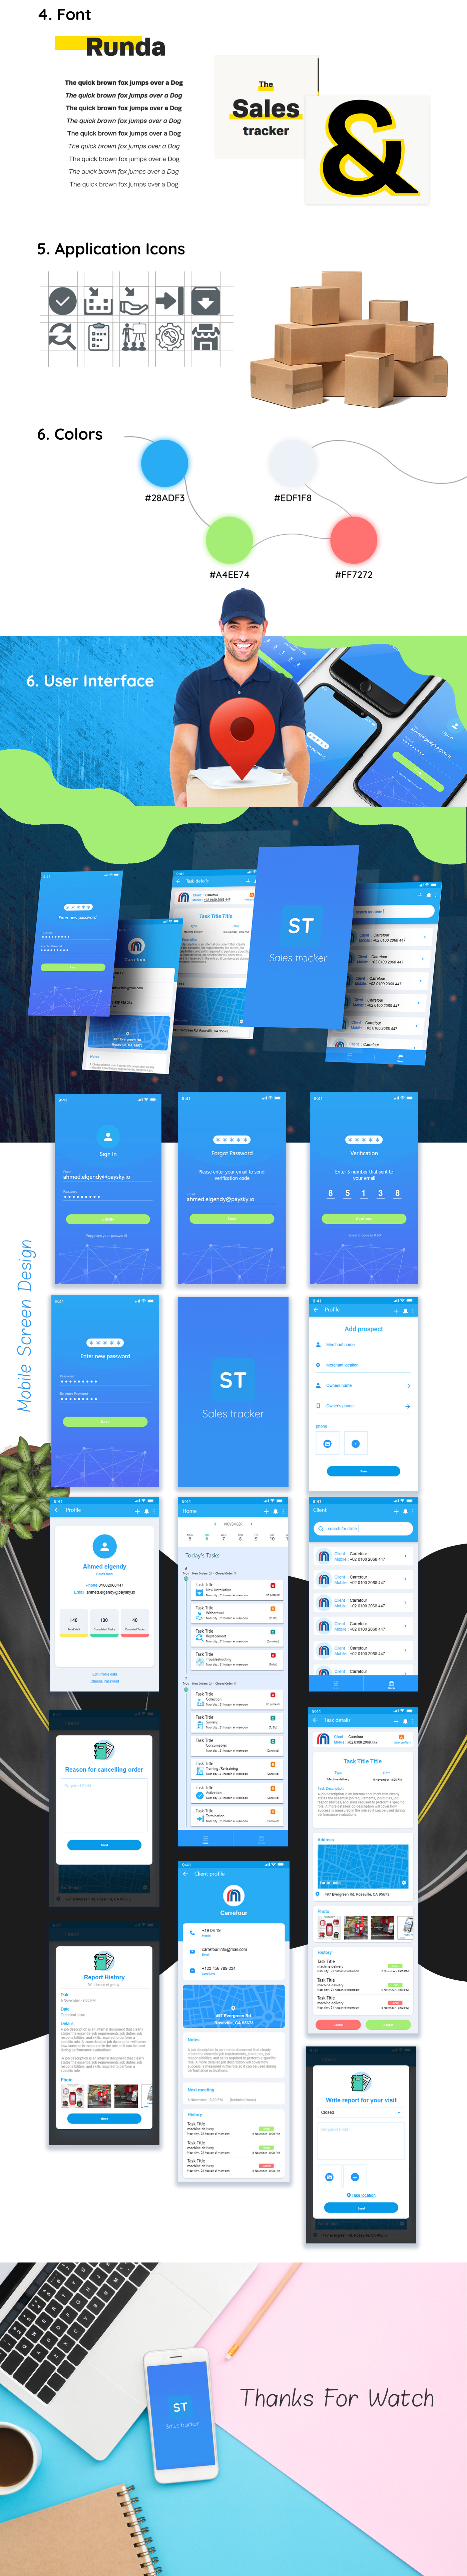 Mobile Application User Experience Design user interface Ui and UX sales tracker mobile wire frame